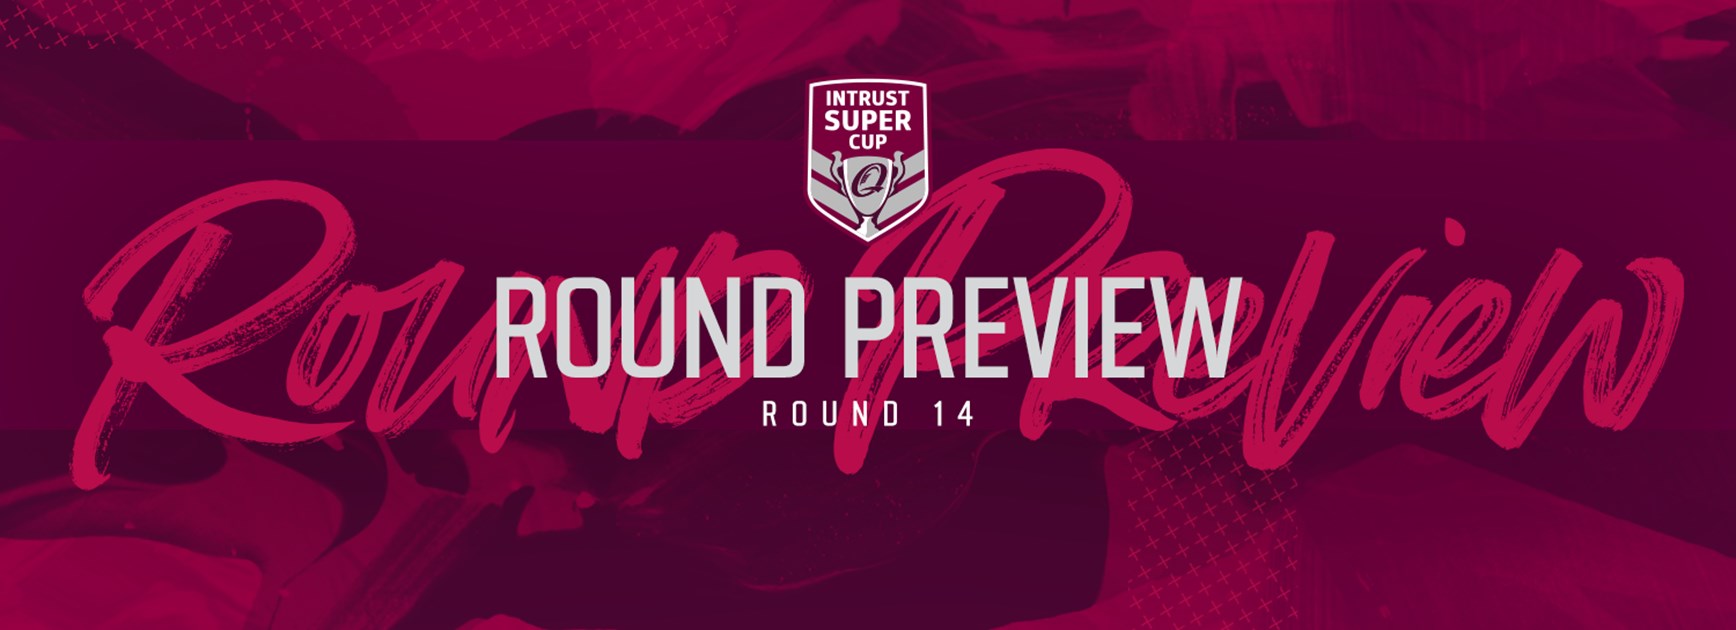 Intrust Super Cup Round 14 preview